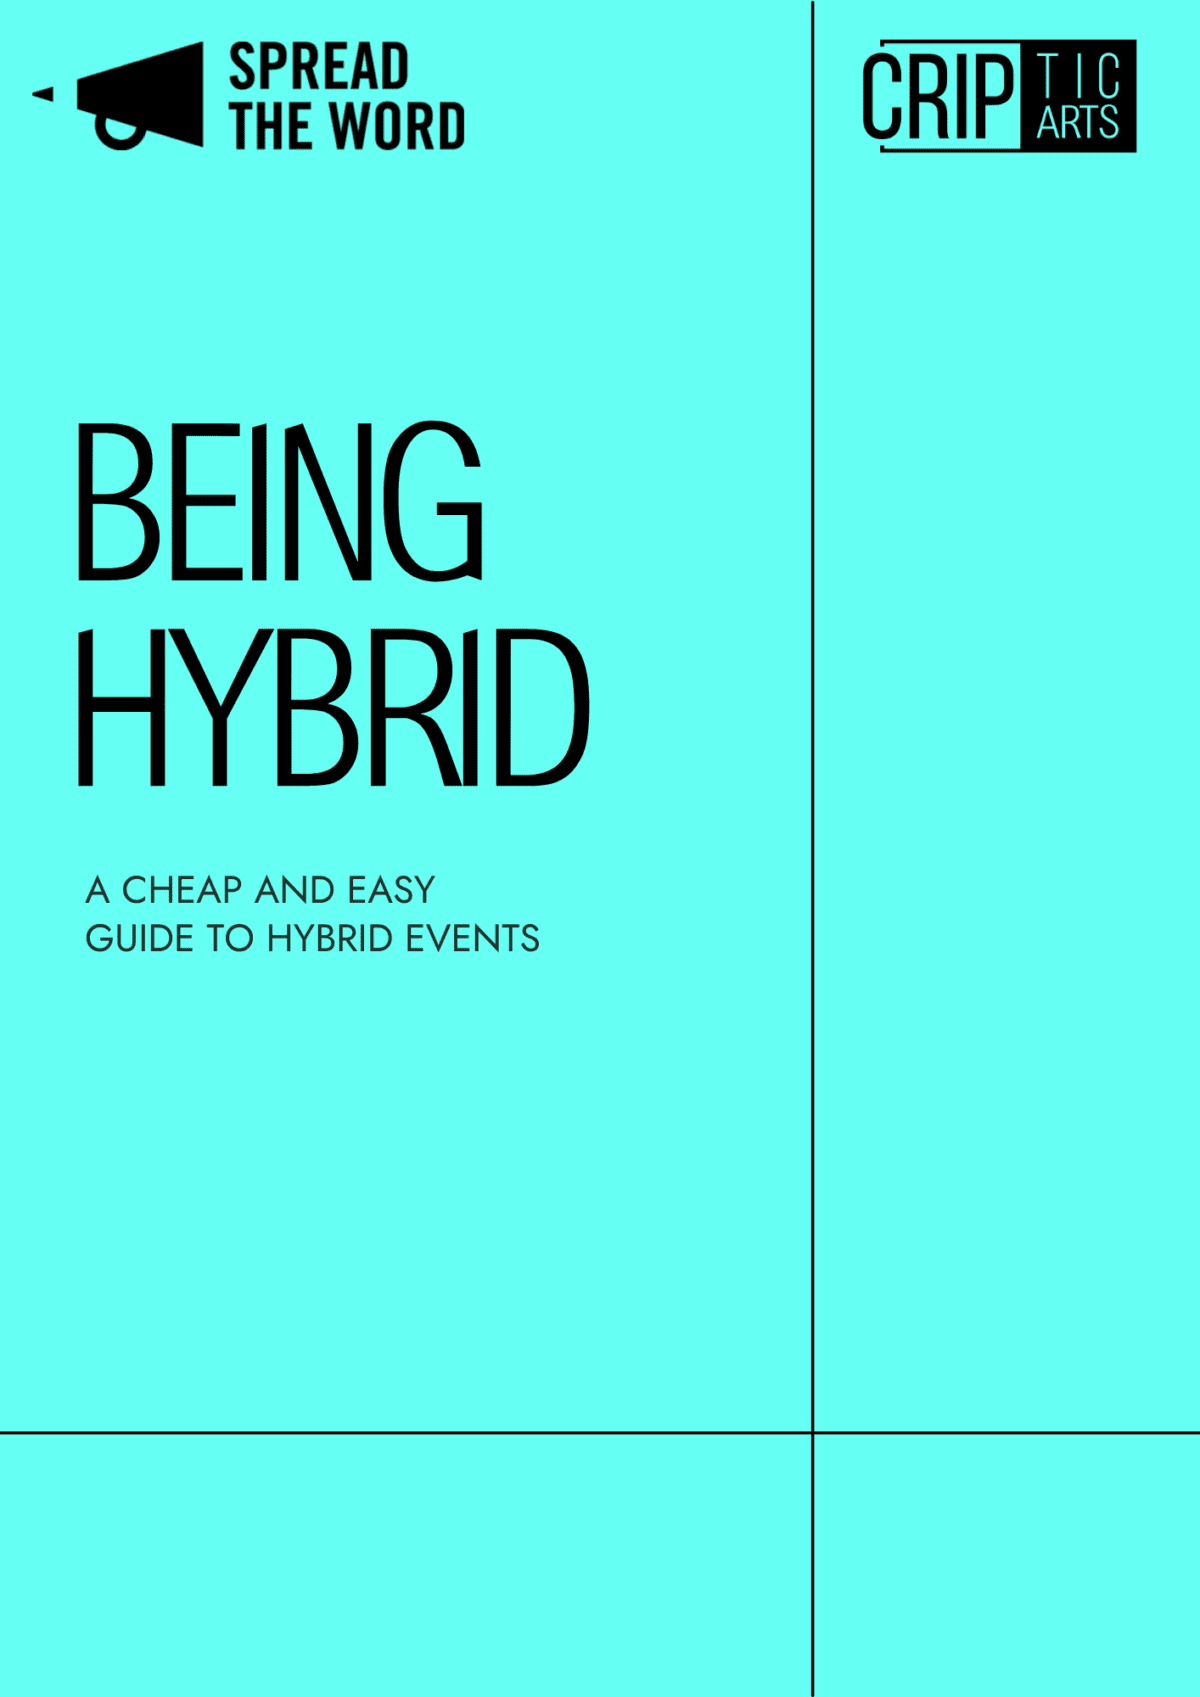 The cover of the Being Hybrid Summary - a cheap and easy guide to hybrid events